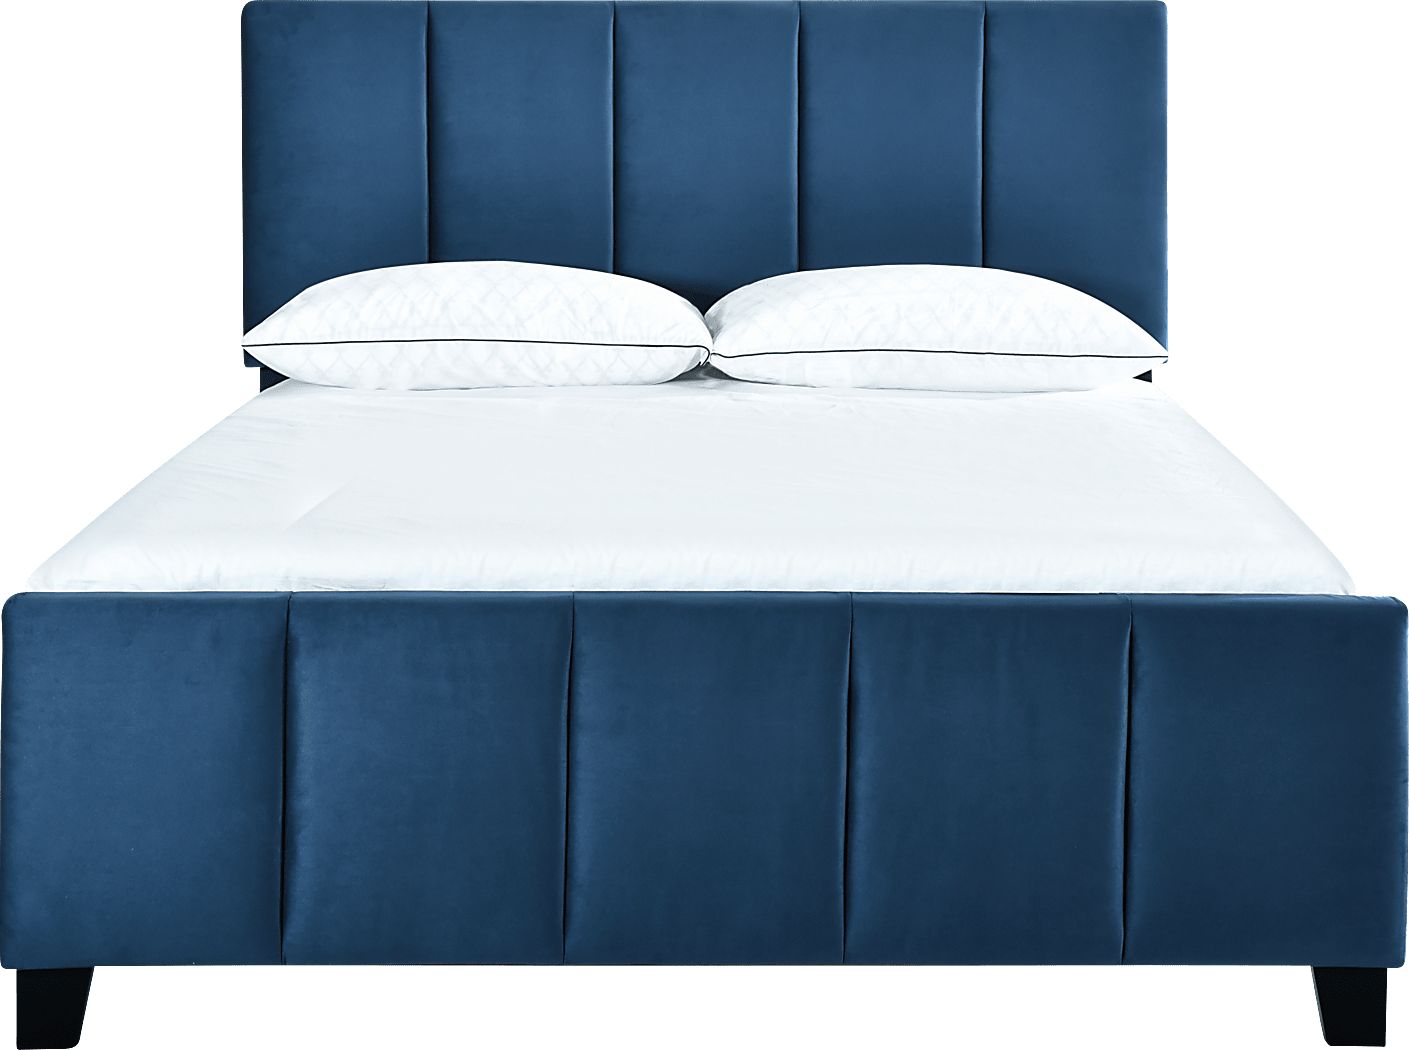 Aloreno Blue King Bed - Rooms To Go